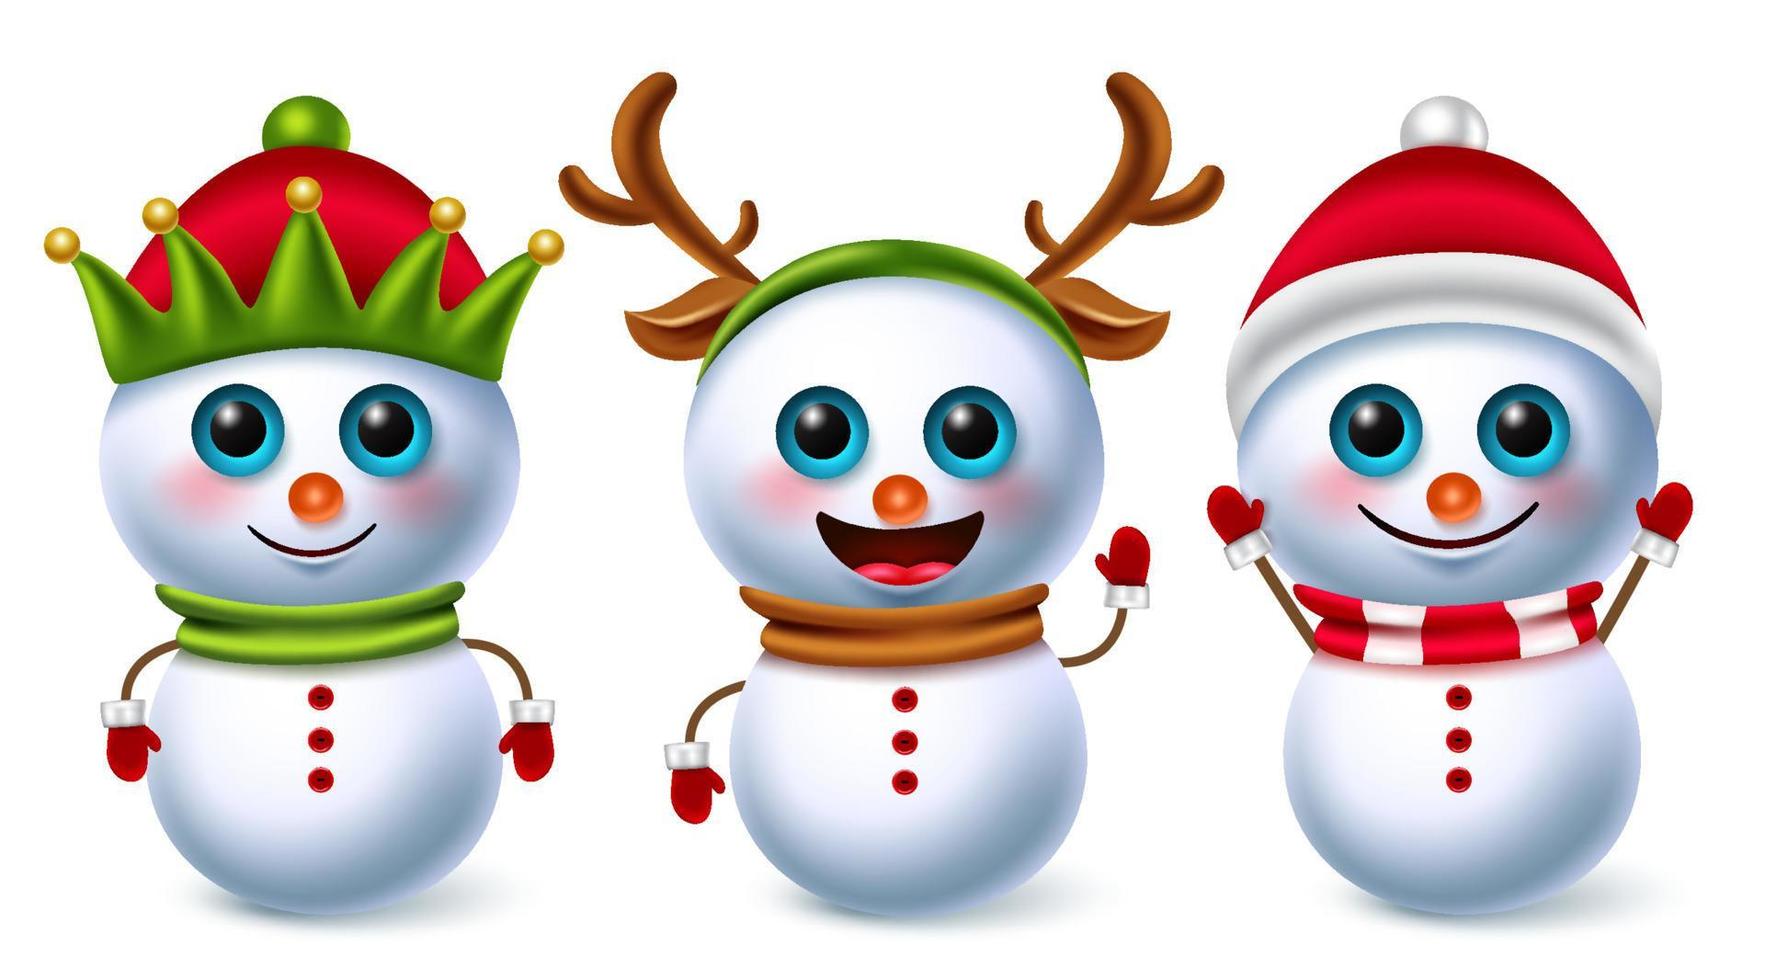 Snowman christmas character vector set. Snow man 3d characters in cute costume like santa, elf and reindeer for holiday season xmas winter collection element design. Vector illustration.